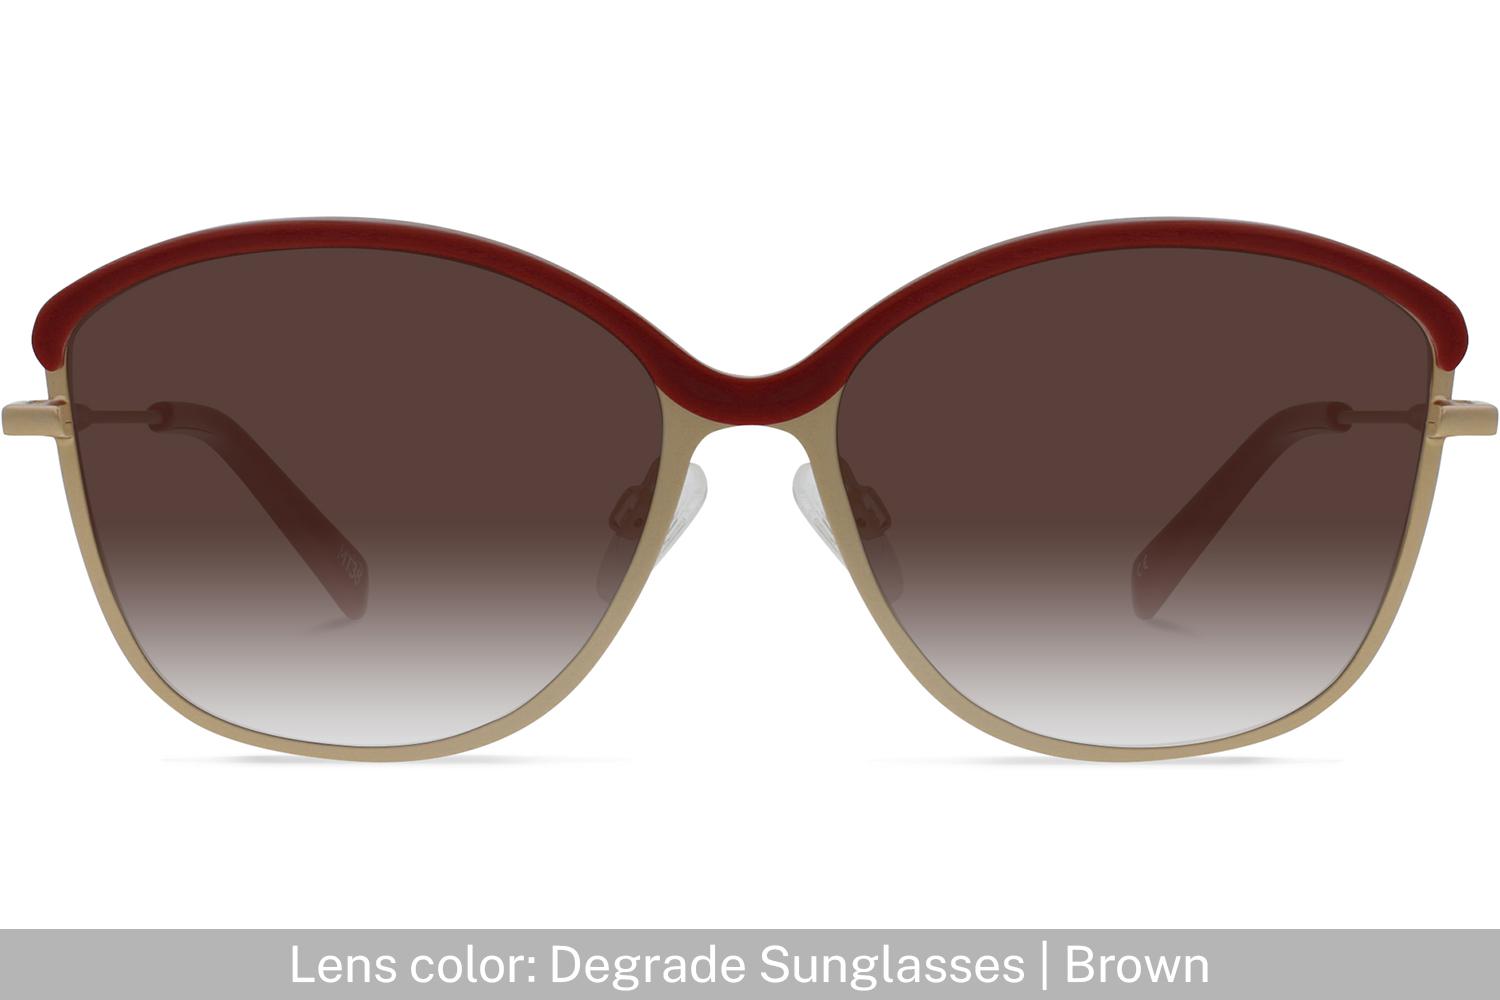 Grace K. | Brushed Bronze Metal with Scarlet Red - 6